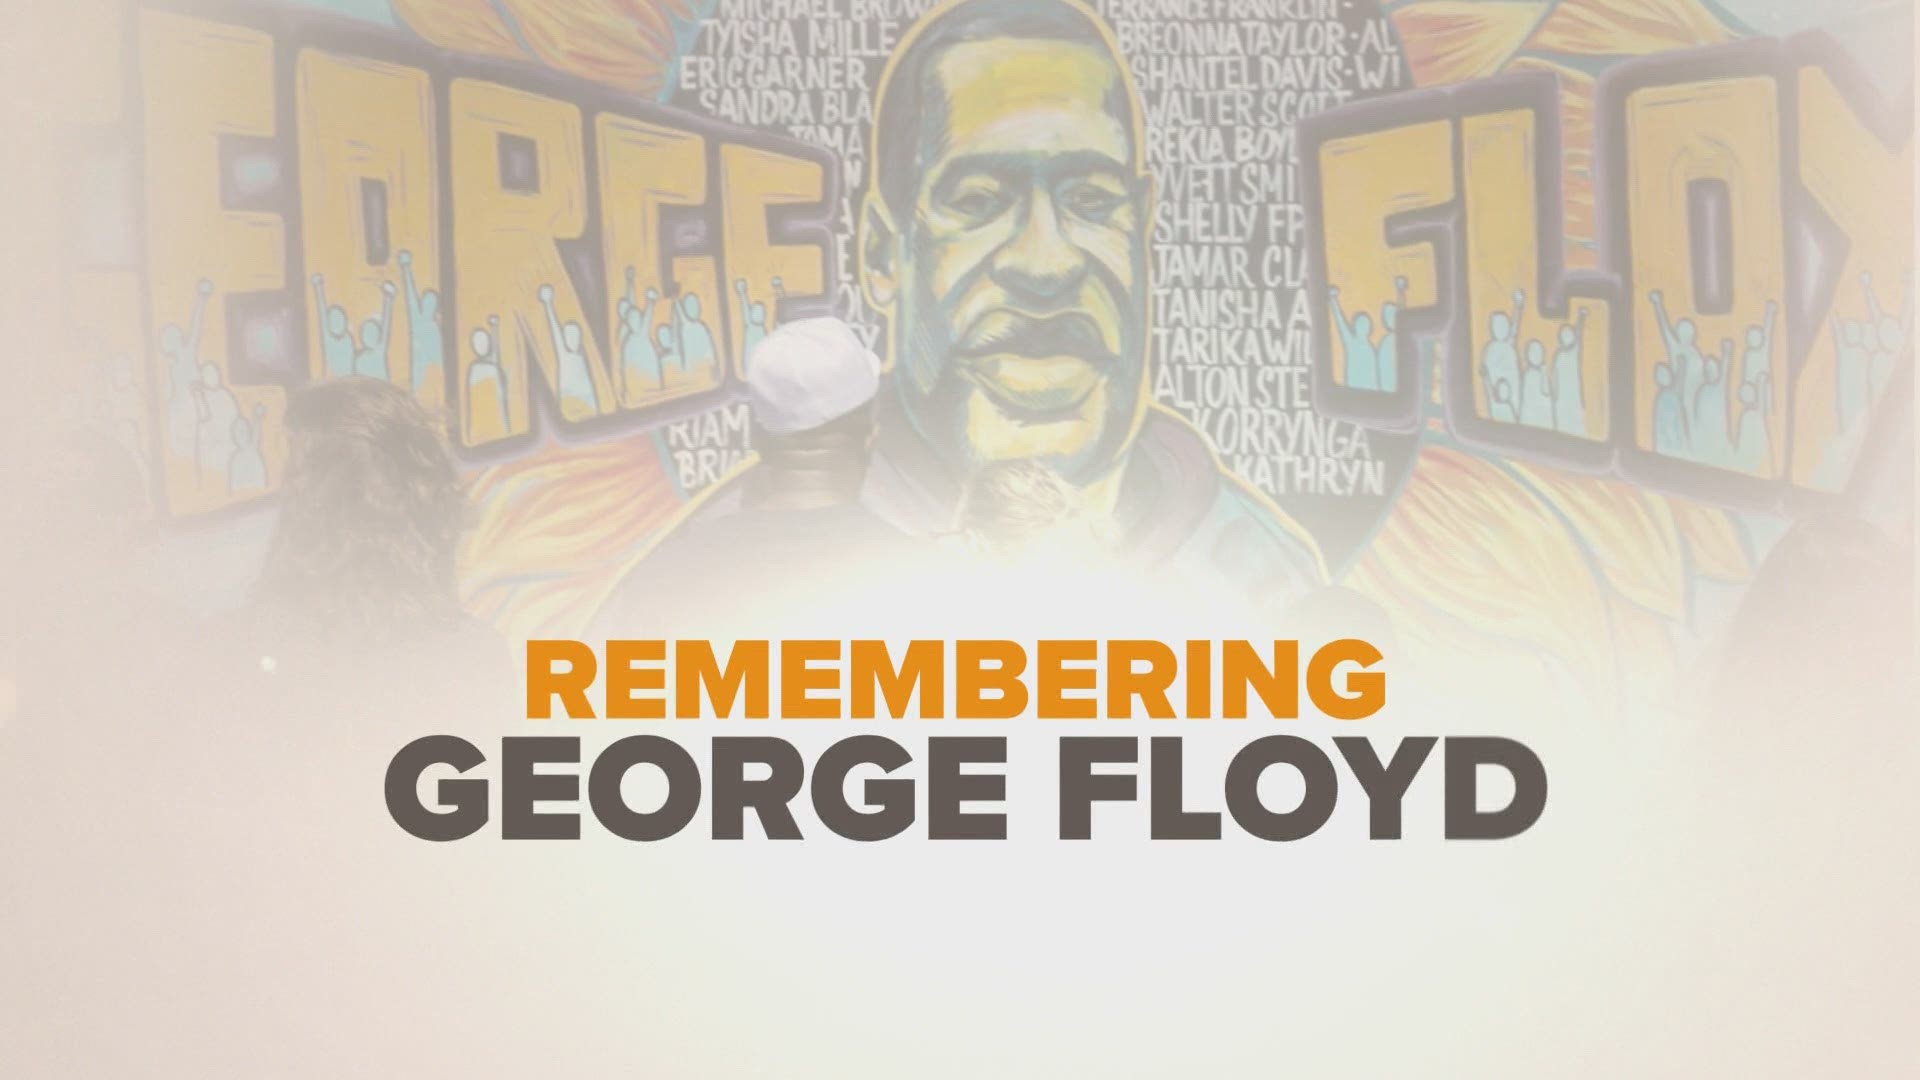 It's been one year since the murder of George Floyd. People in Portland gathered on Congress Street on Tuesday to stand in solidarity.